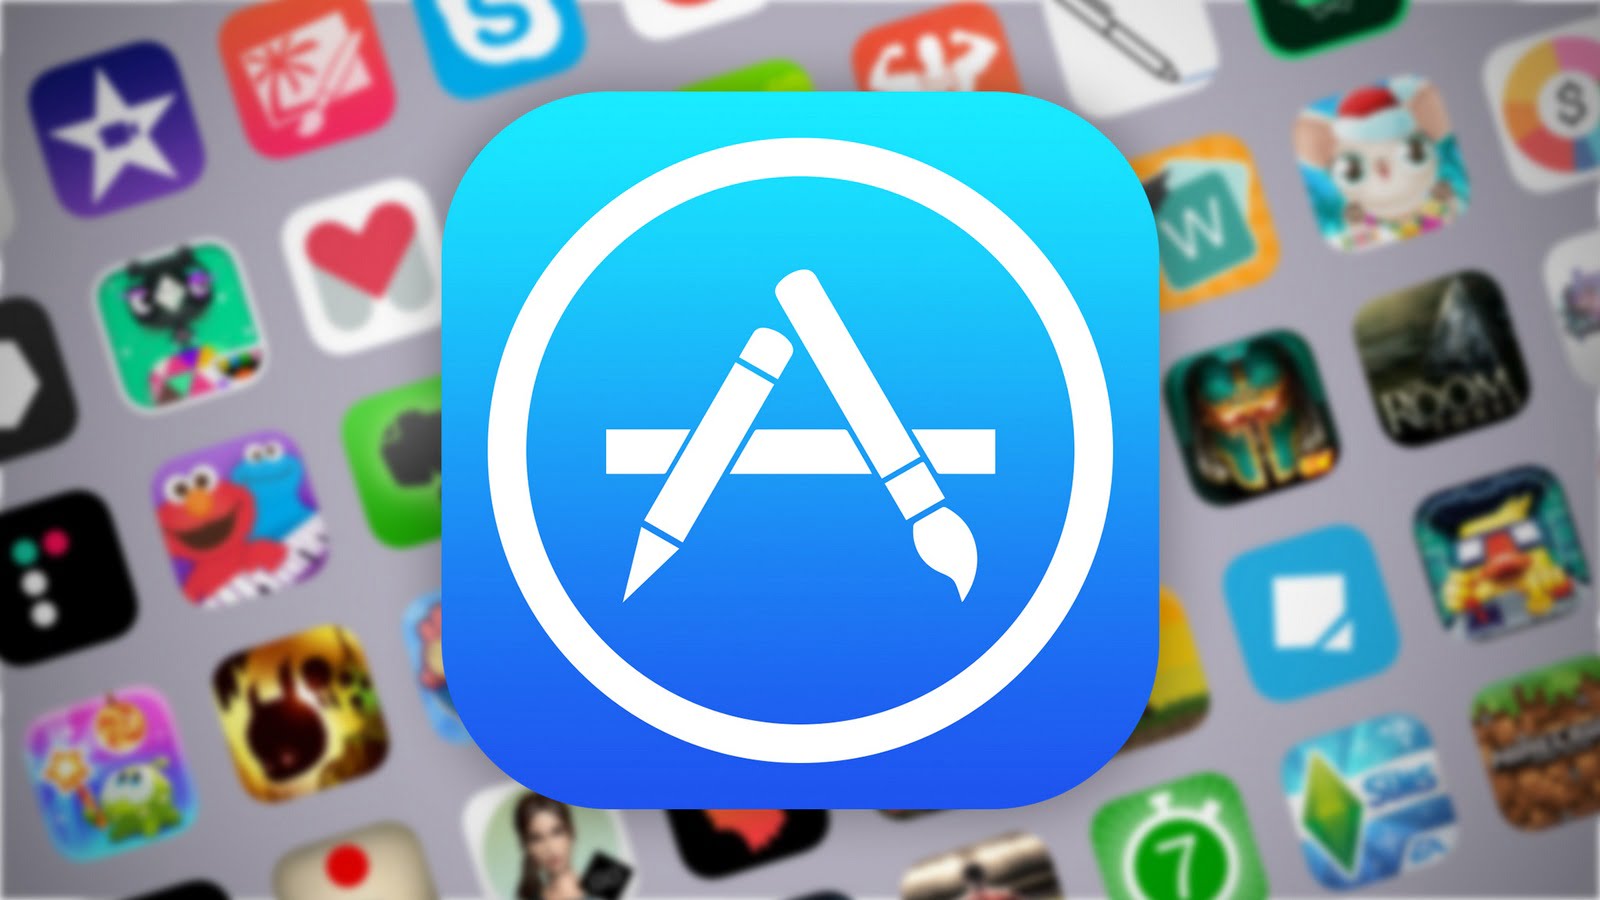 App Store almost double the turnover of Google Play Store